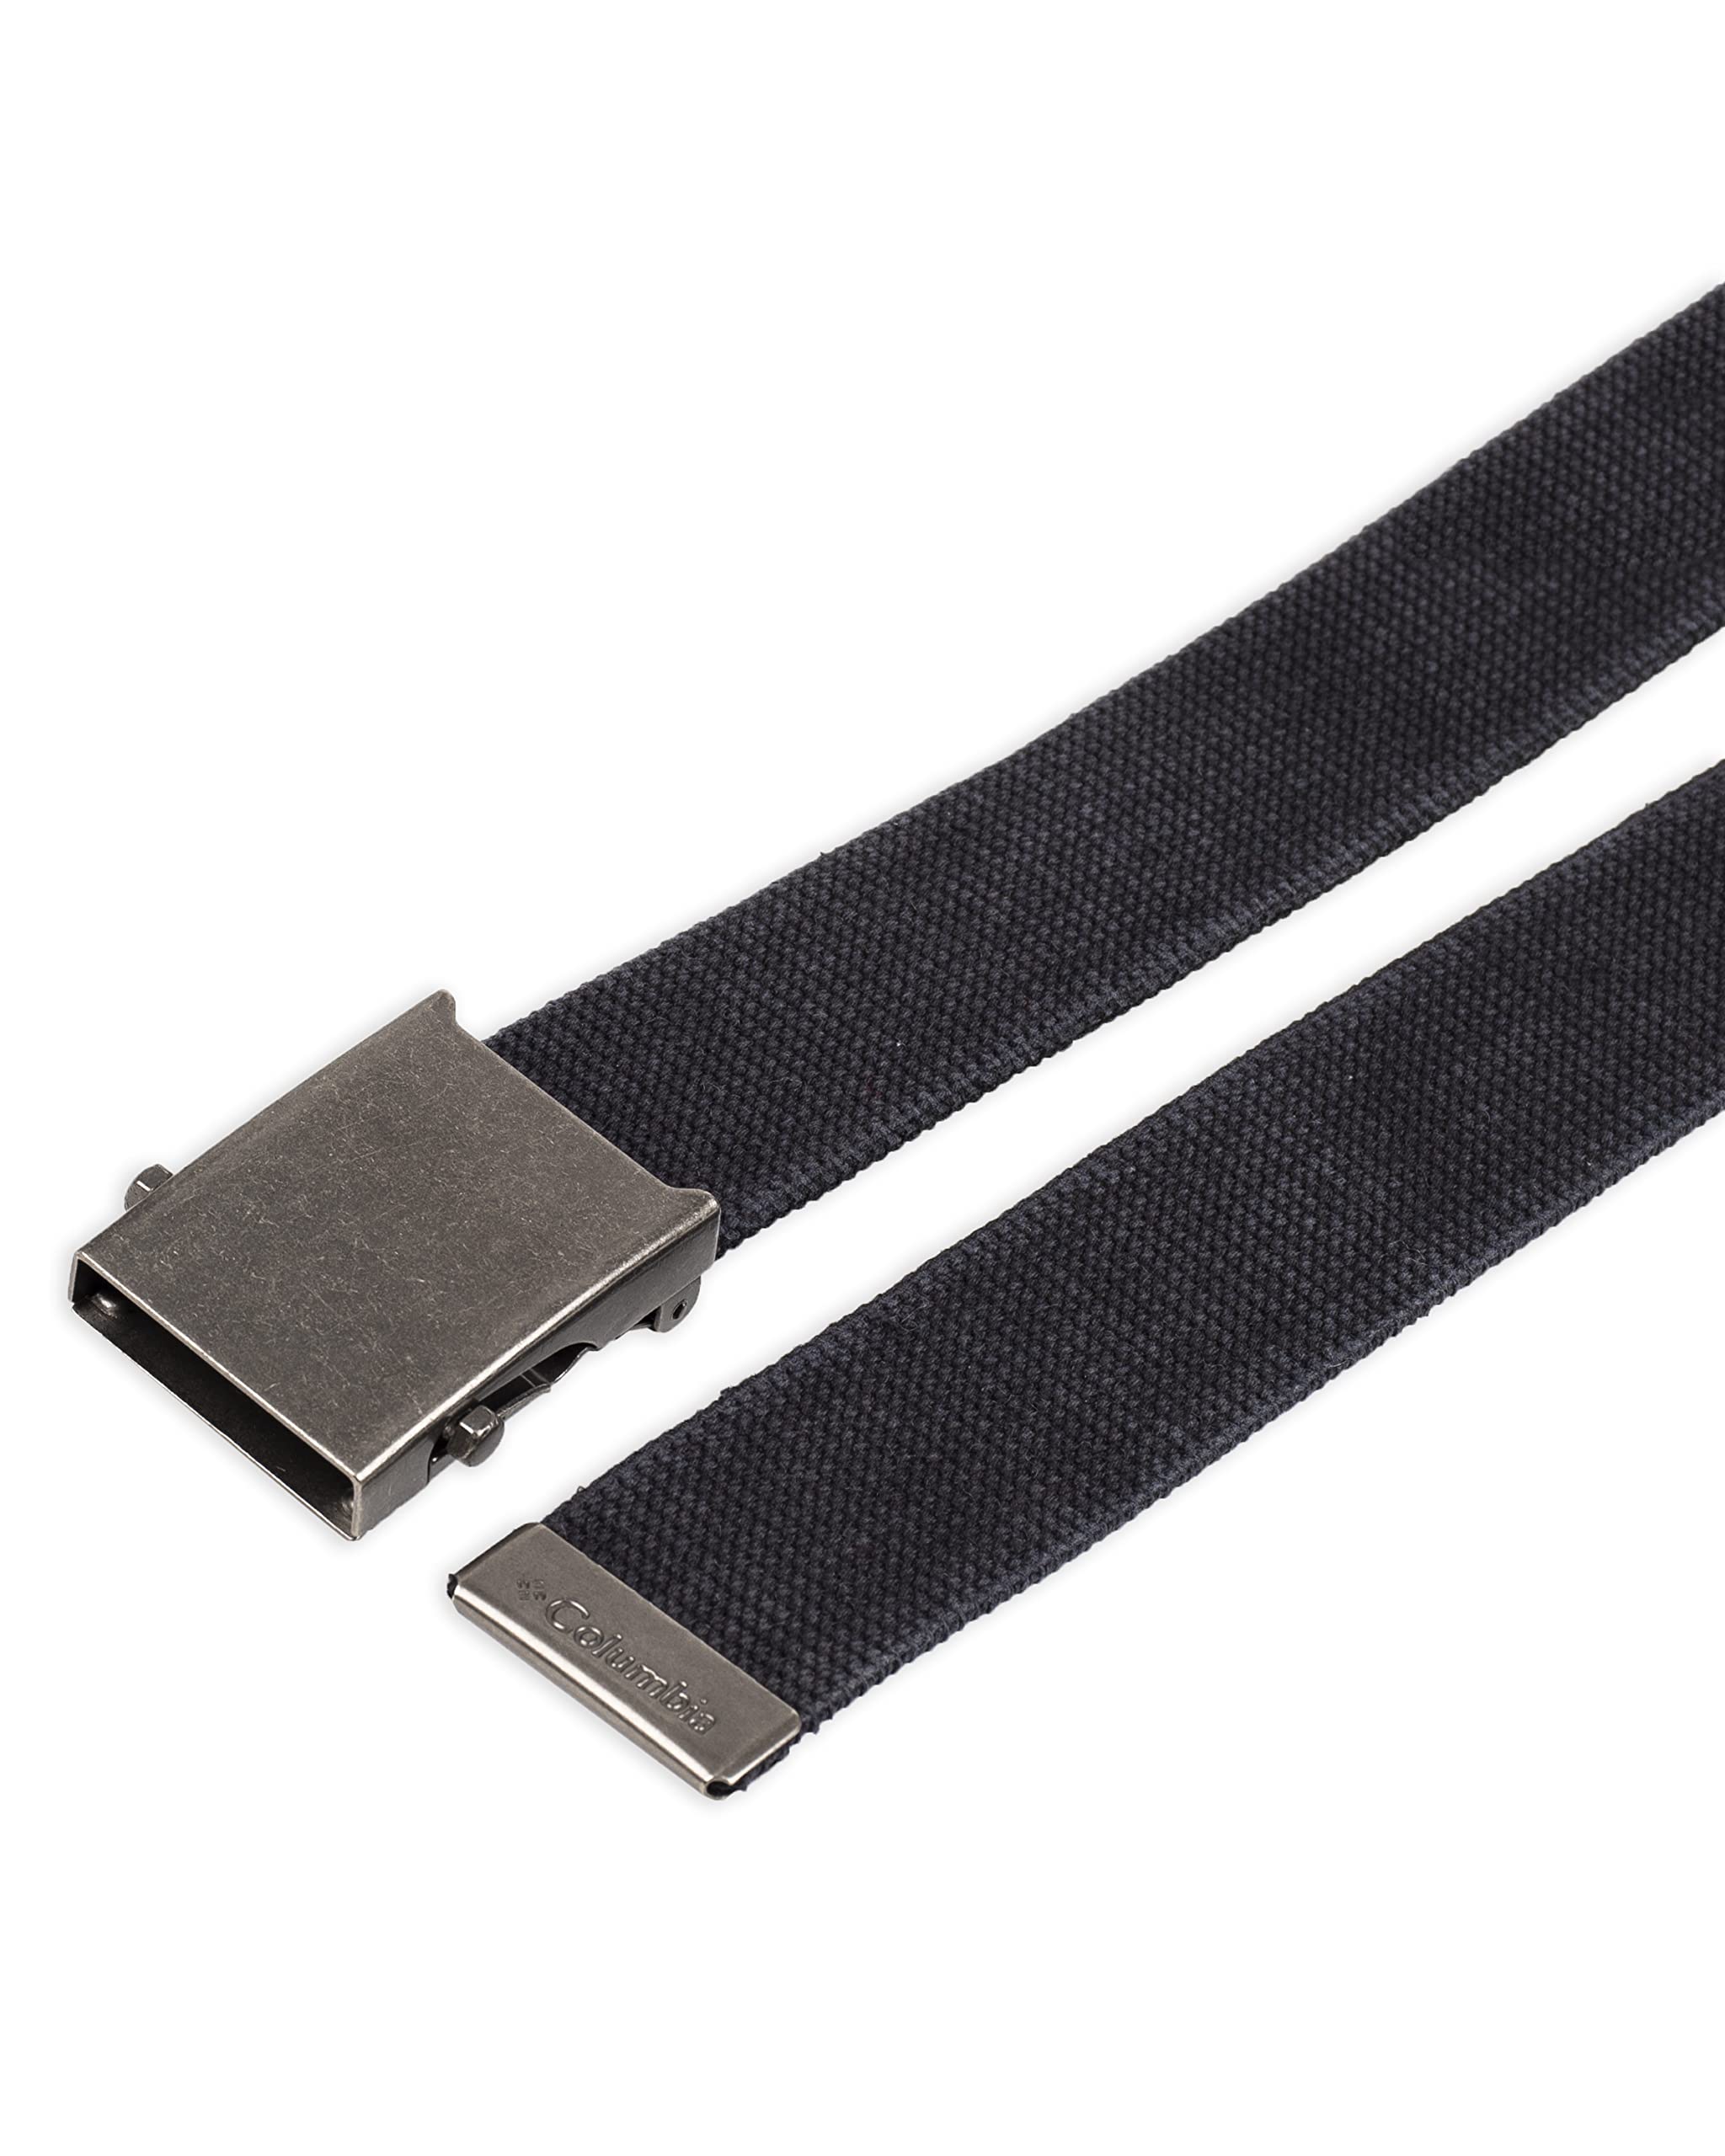 Columbia Unisex-Adult Military Web Belt-Adjustable One Size Cotton Strap and Metal Plaque Buckle